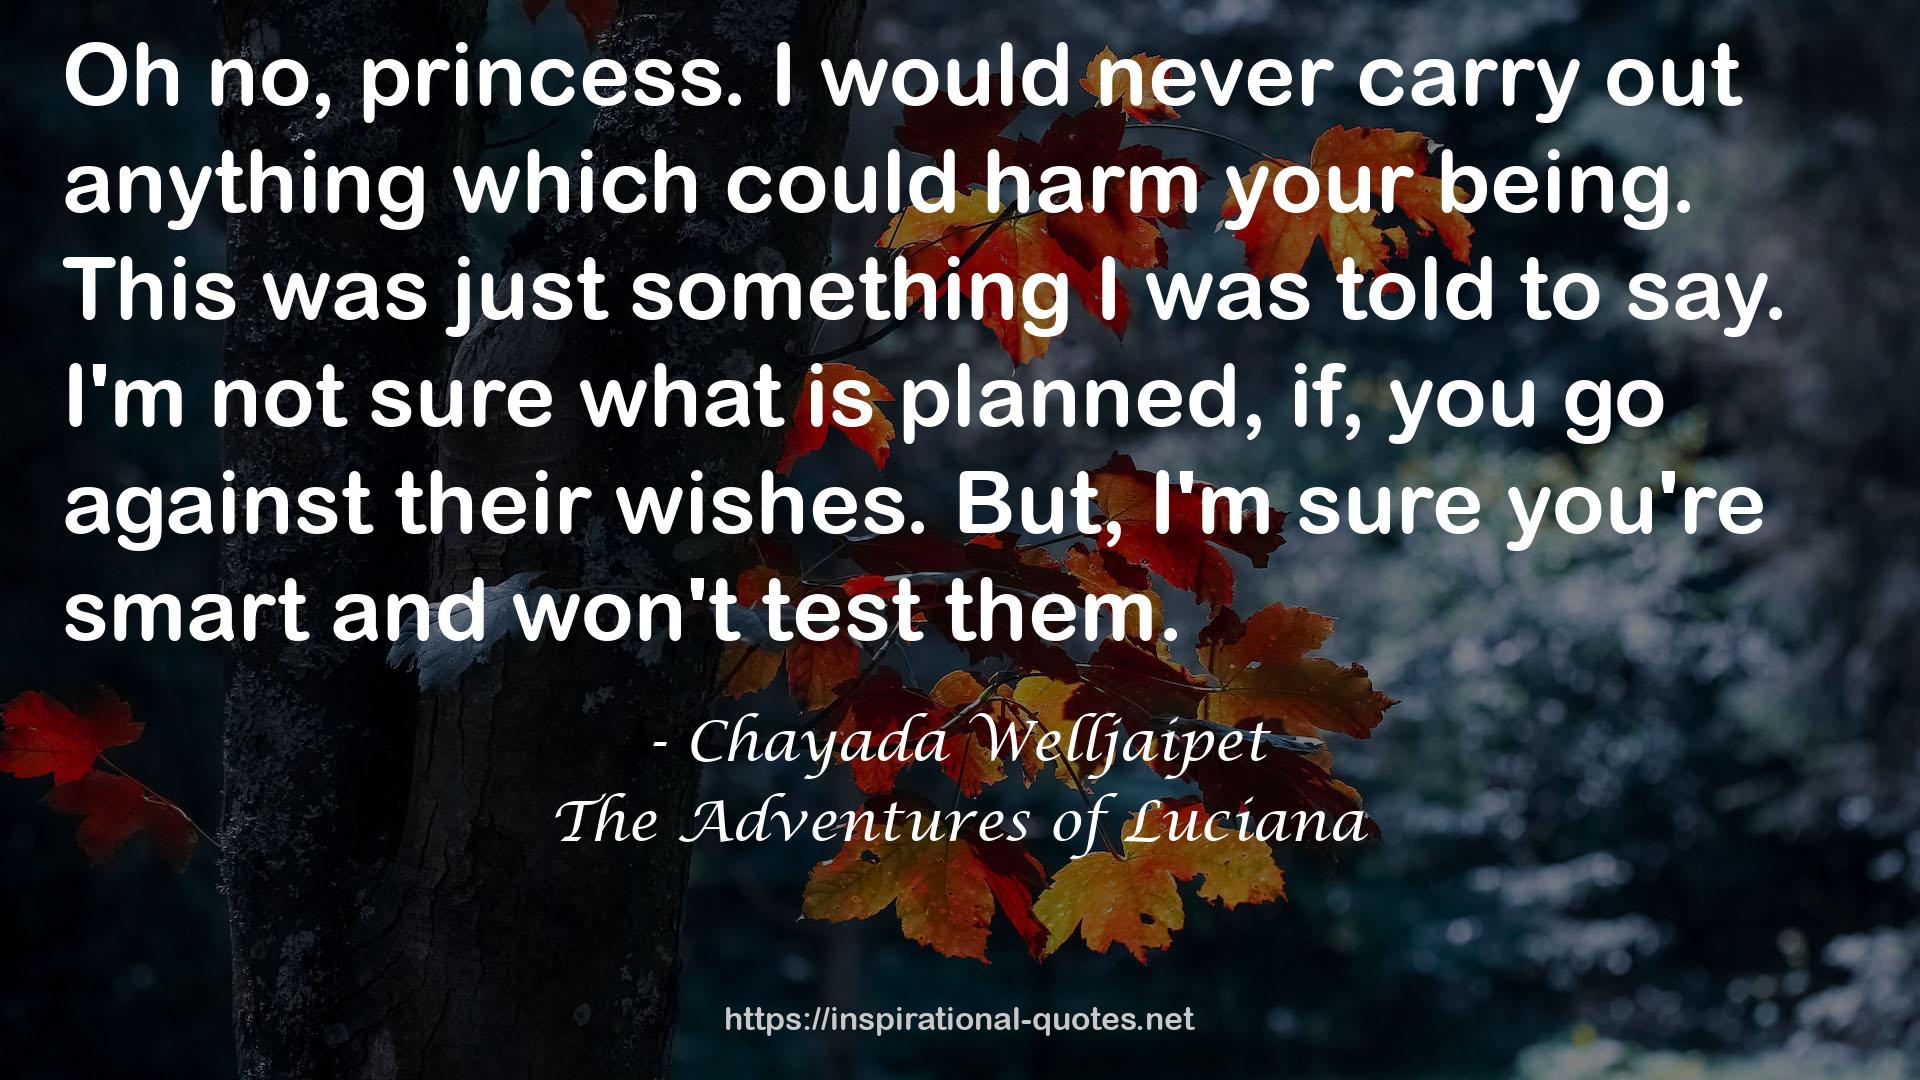 The Adventures of Luciana QUOTES